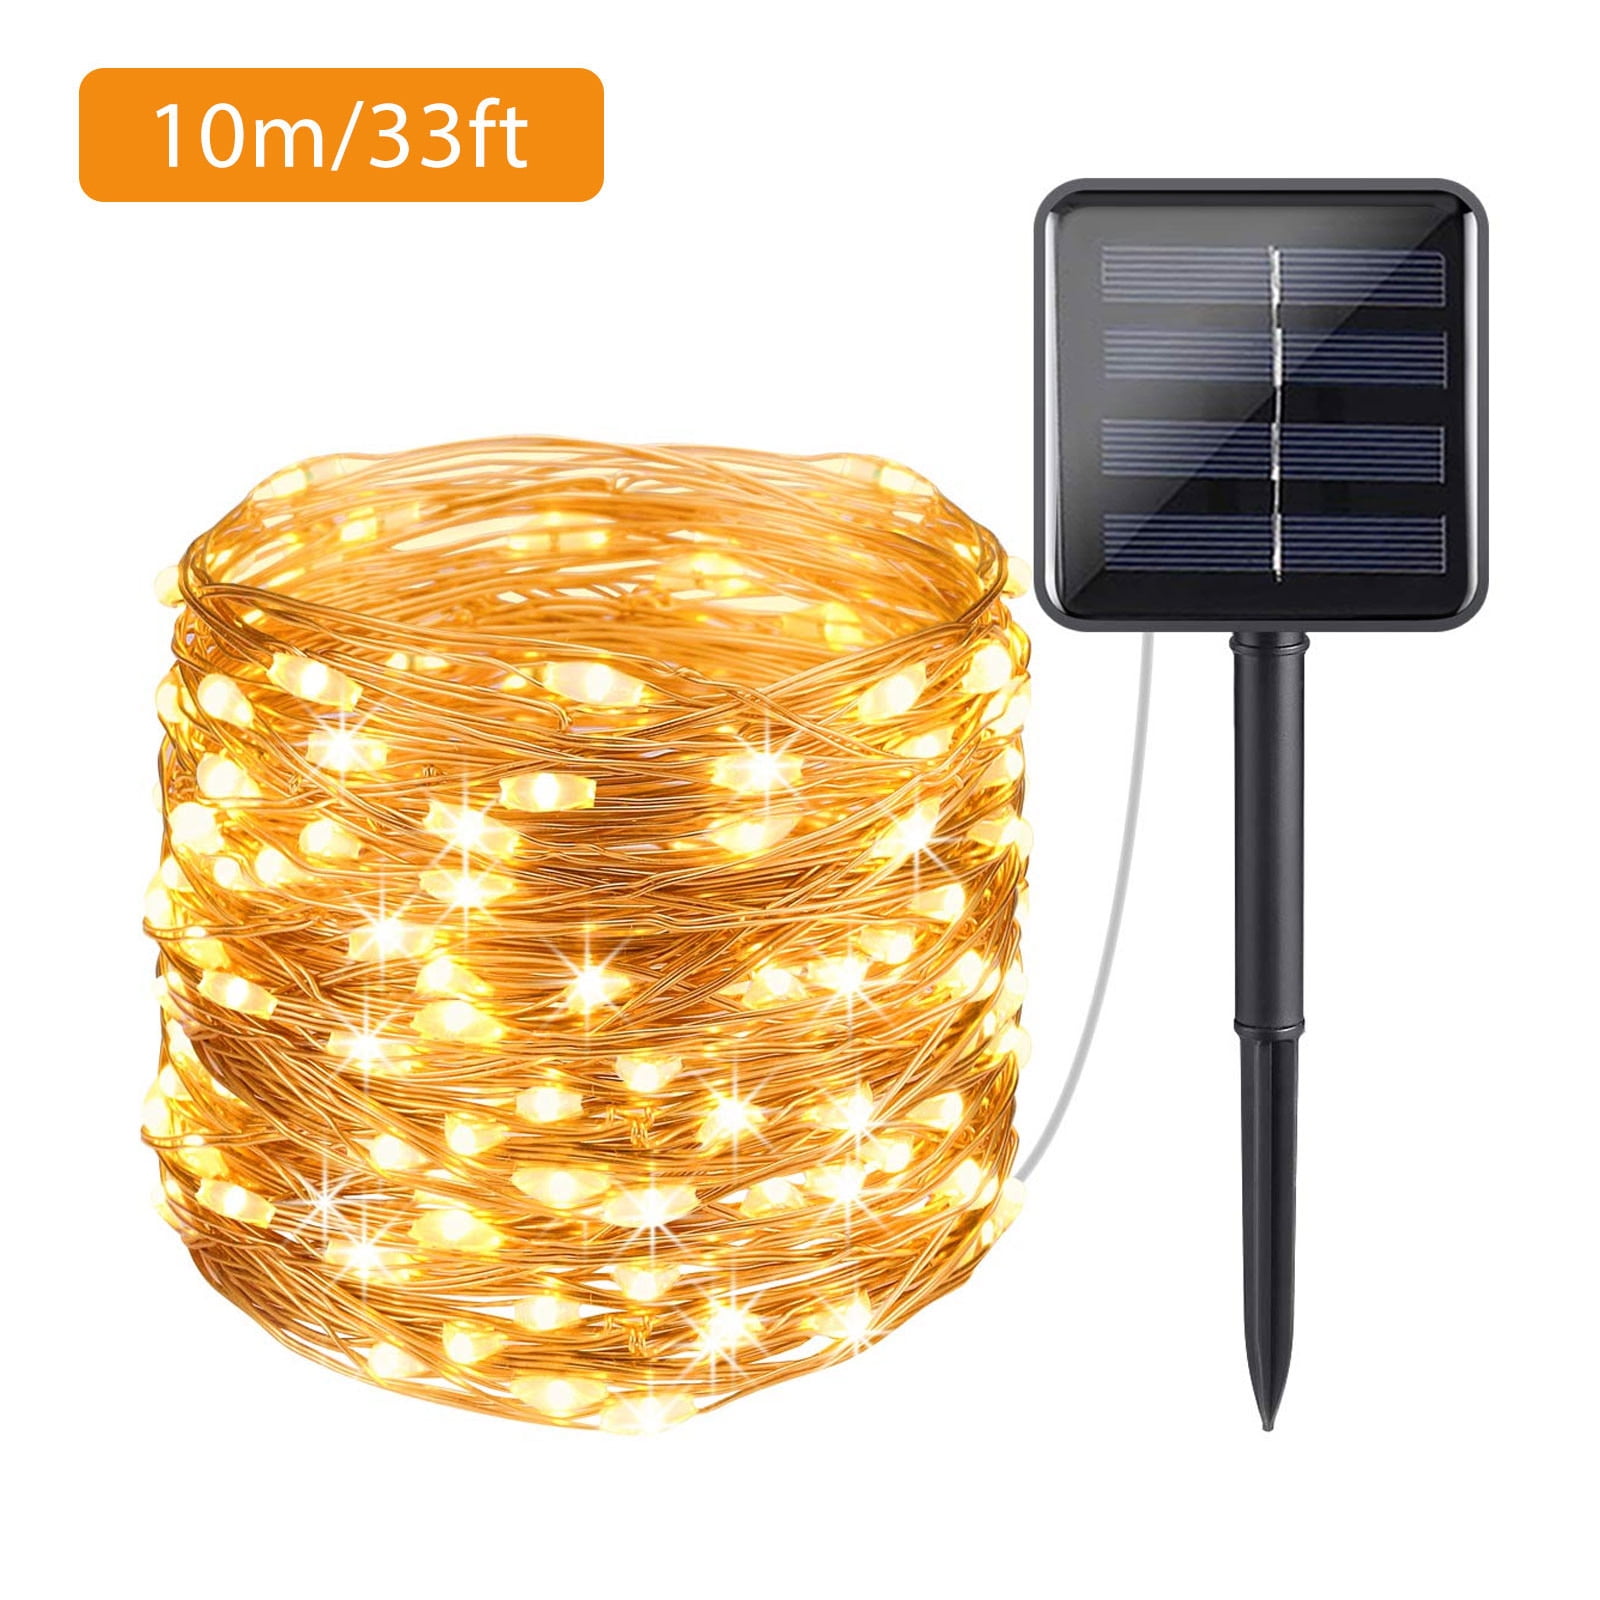 33FT Warm White100 LED Battery Power Copper Wire String Fairy Light Waterproof 